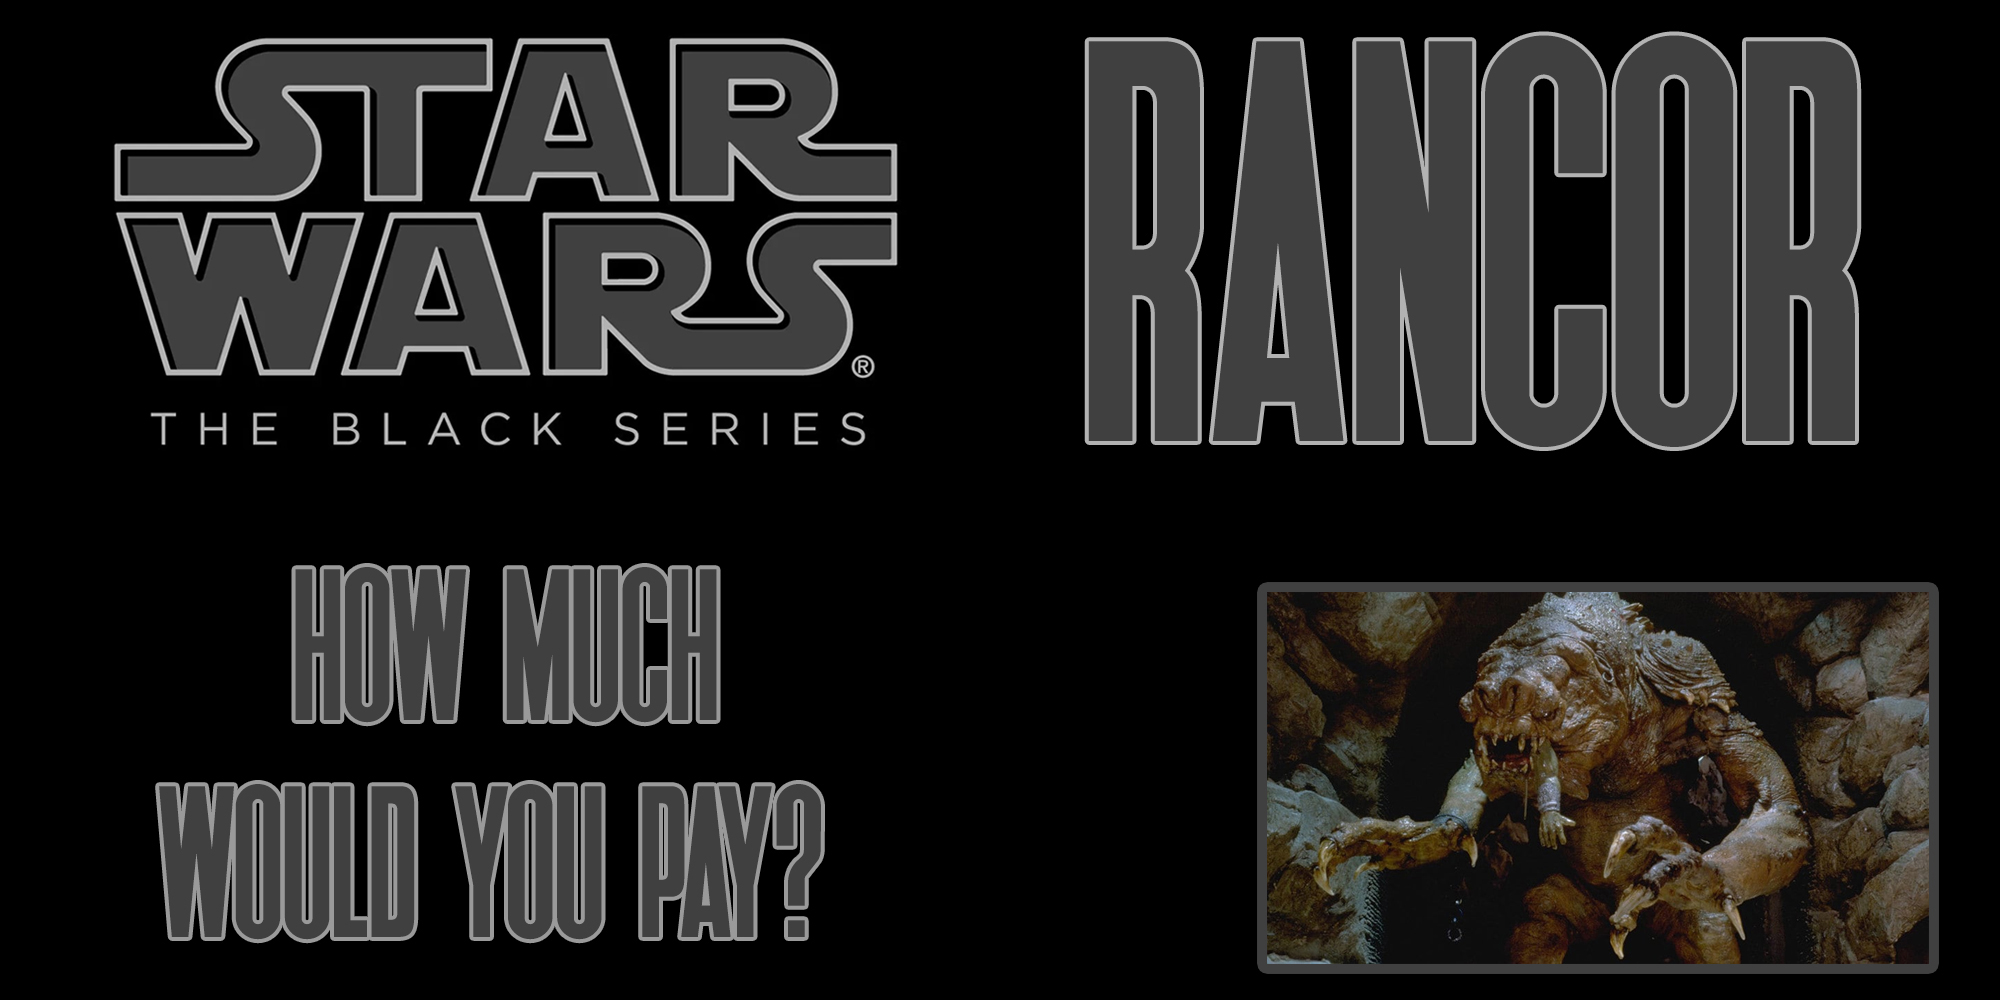 How Much Would You Pay For A Black Series 6" Figure Scaled Rancor?